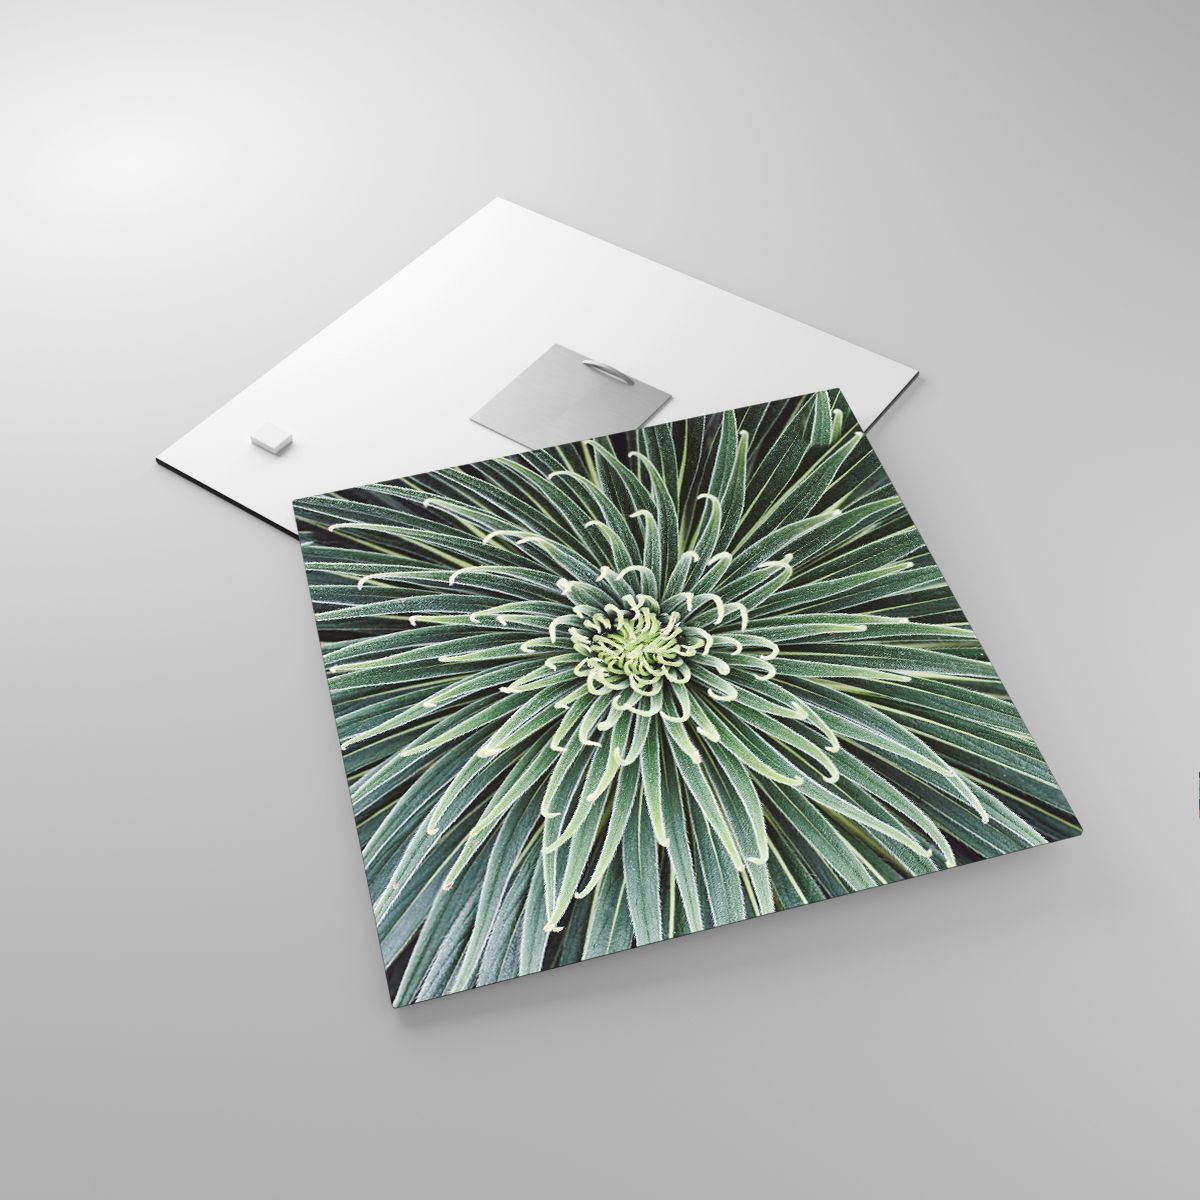 Glass picture  Agave Flower, Glass picture  Agave, Glass picture  Flowers, Glass picture  Tropics, Glass picture  Exotic